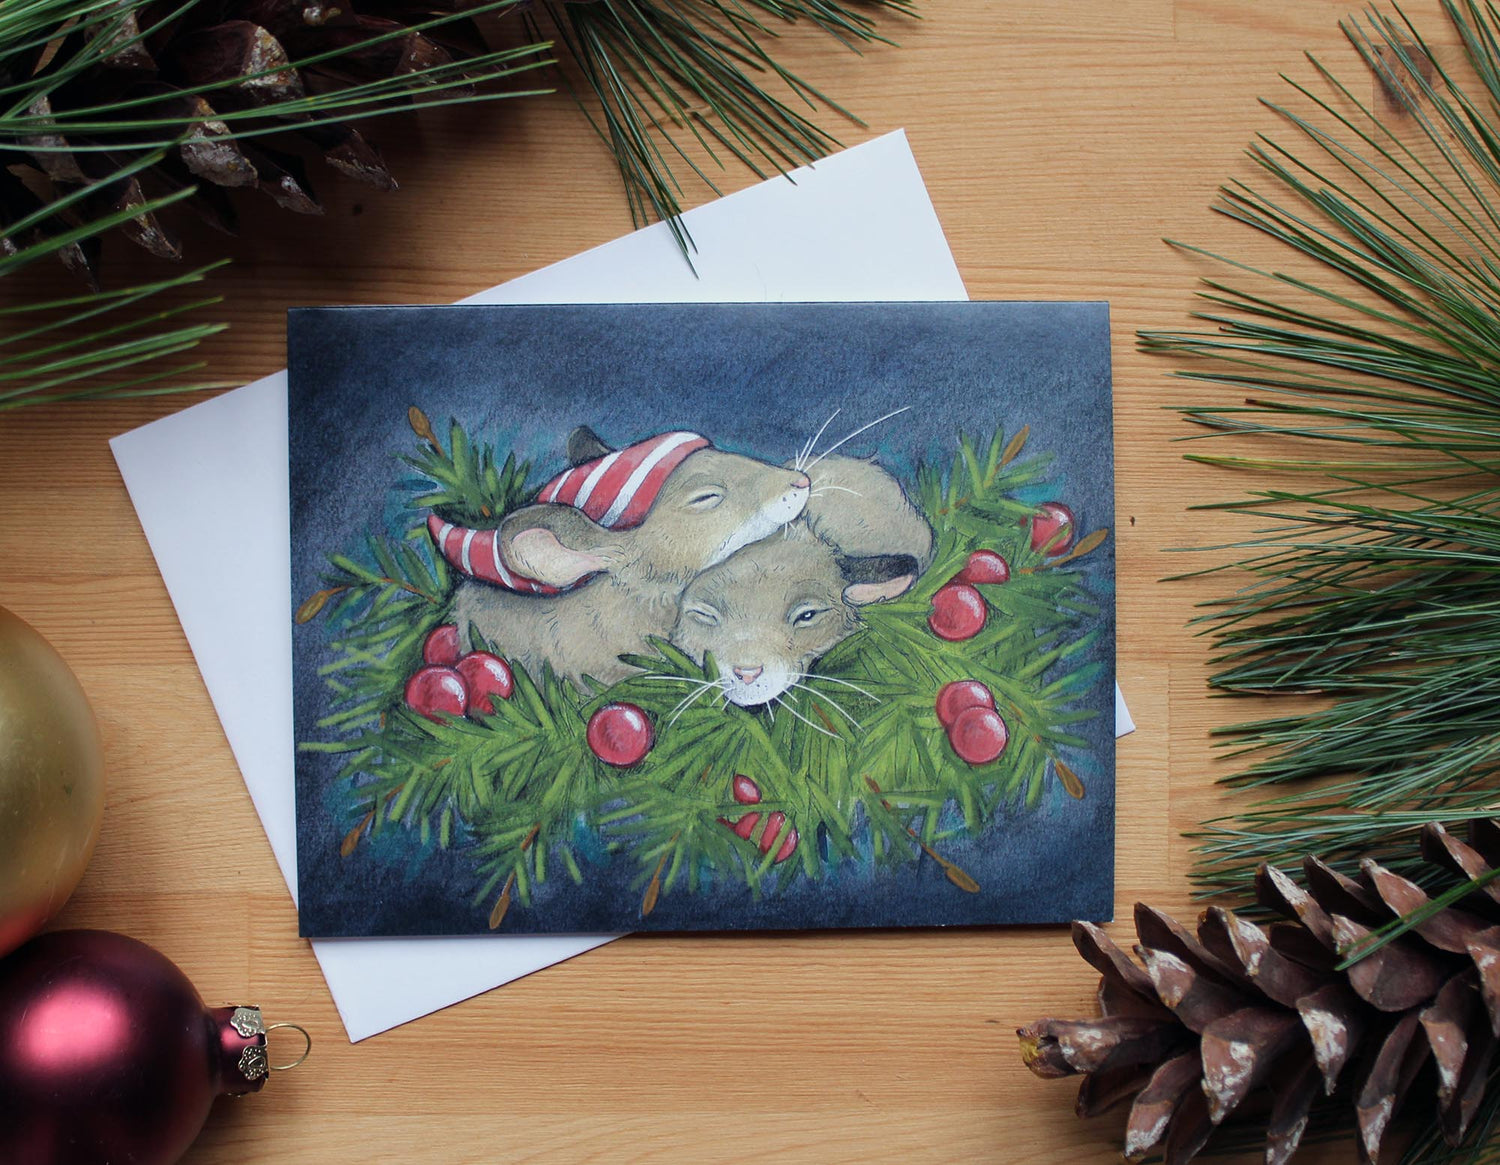 Illustrated christmas card of two sleepy mice cuddling together  on a bed of pine needles and red berries.